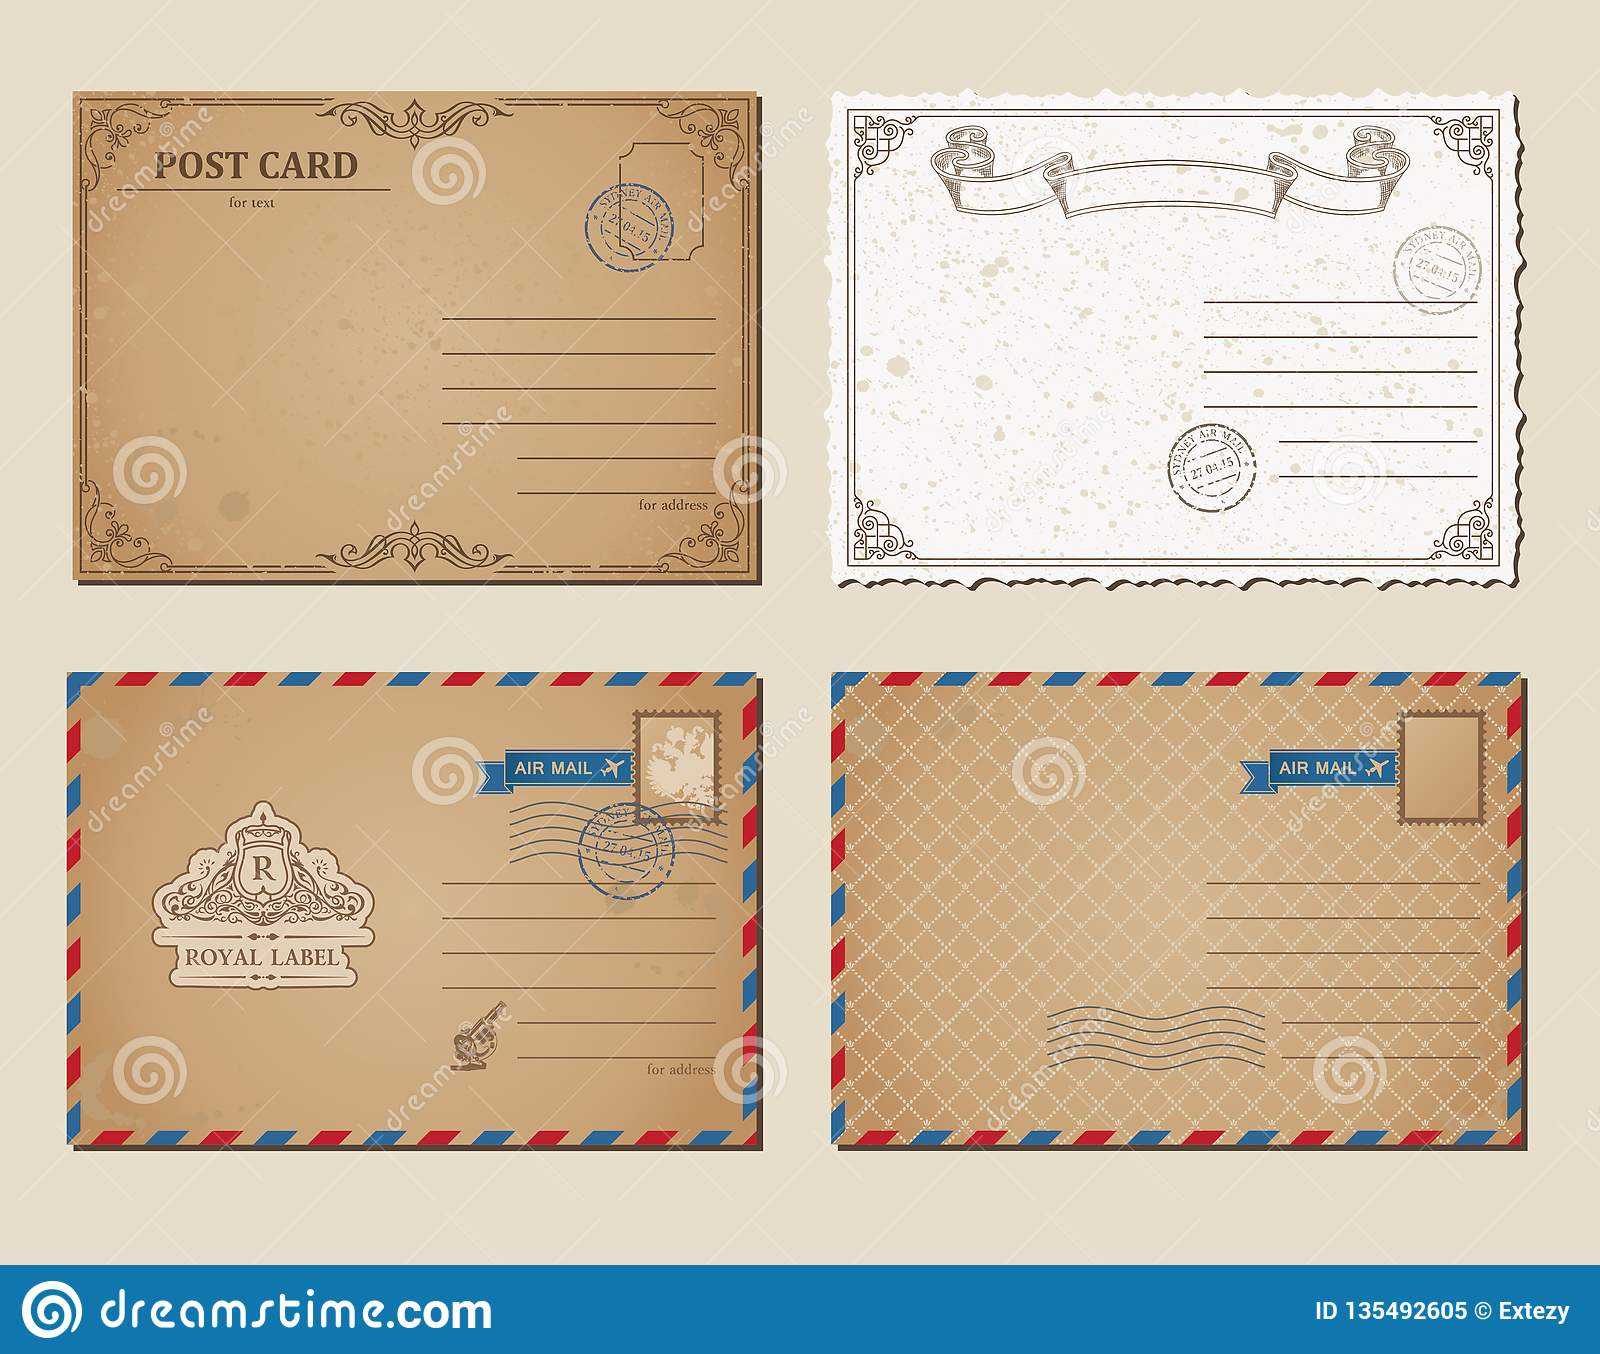 Vintage Postcards, Postage Stamps, Vector Illustration Post With Post Cards Template